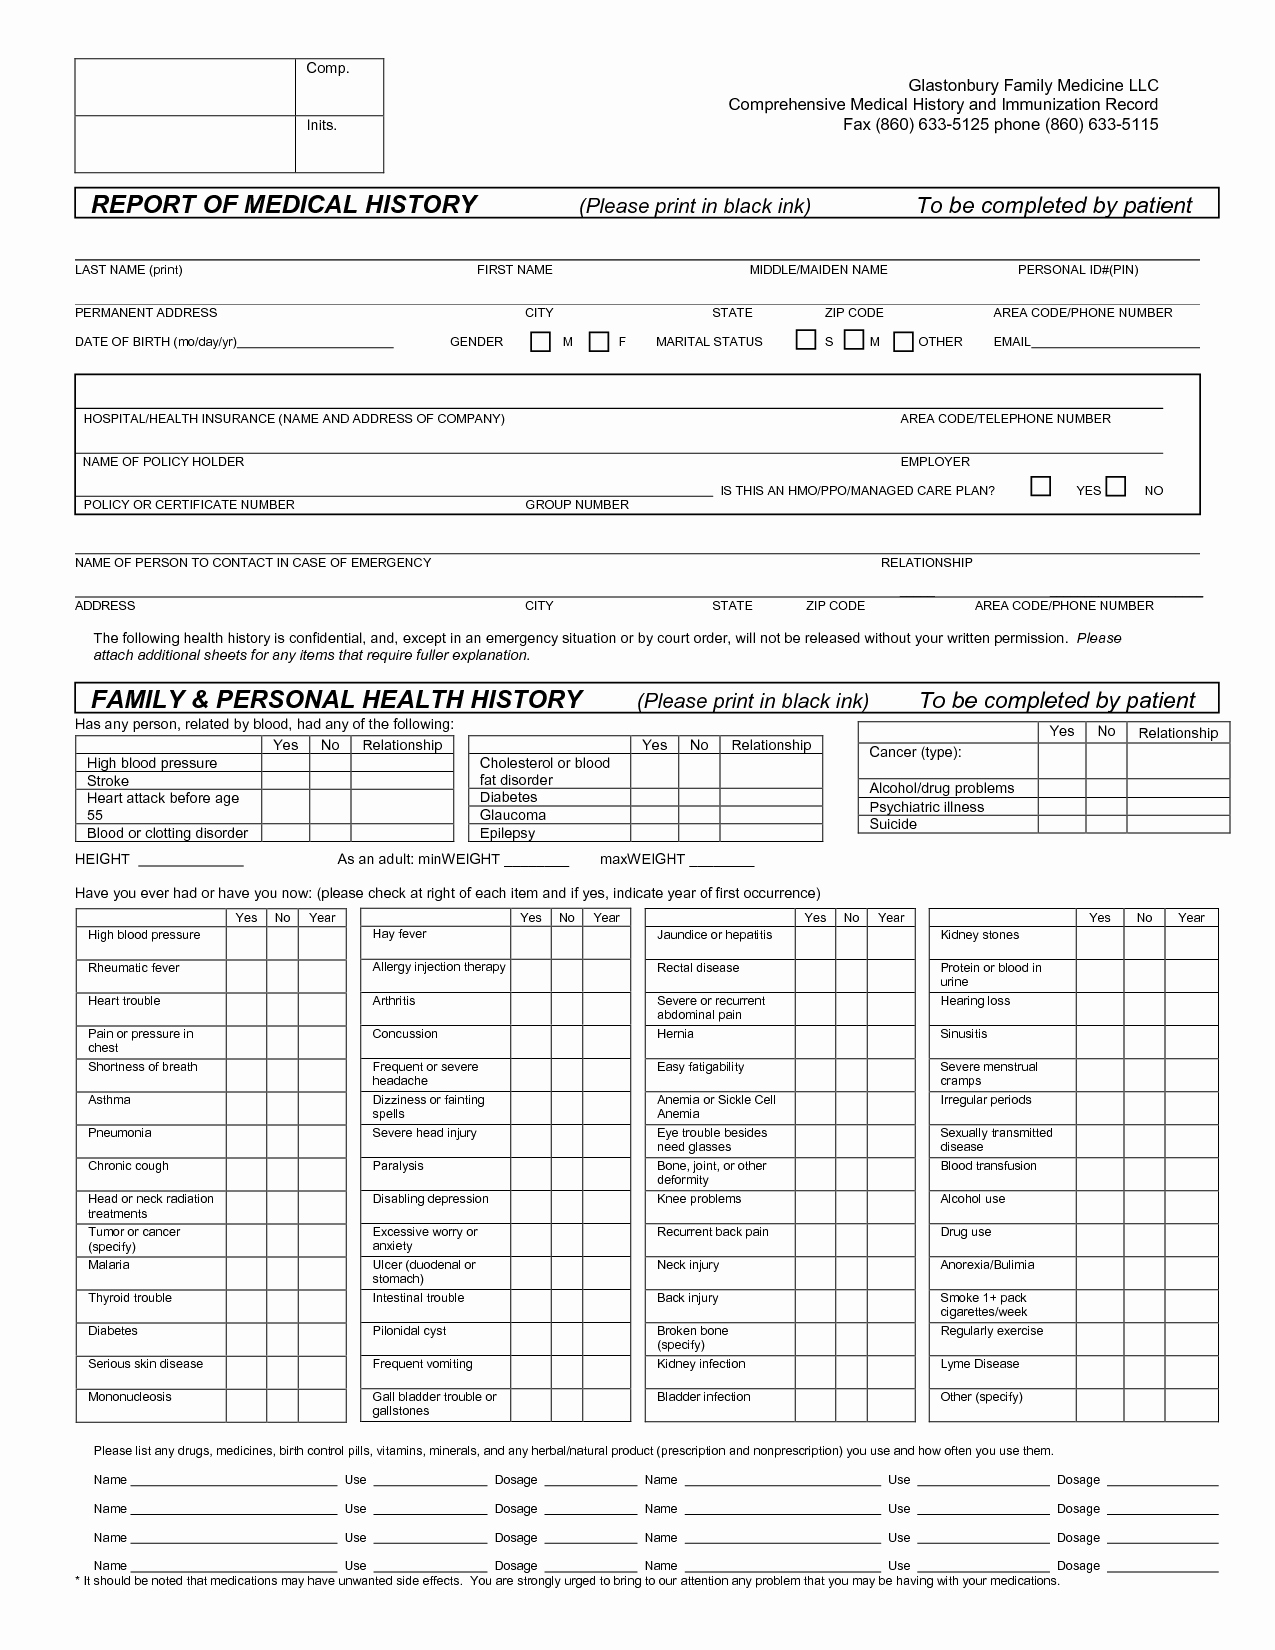 Personal Medical History Template Inspirational Report Of Medical History Family Personal Health History